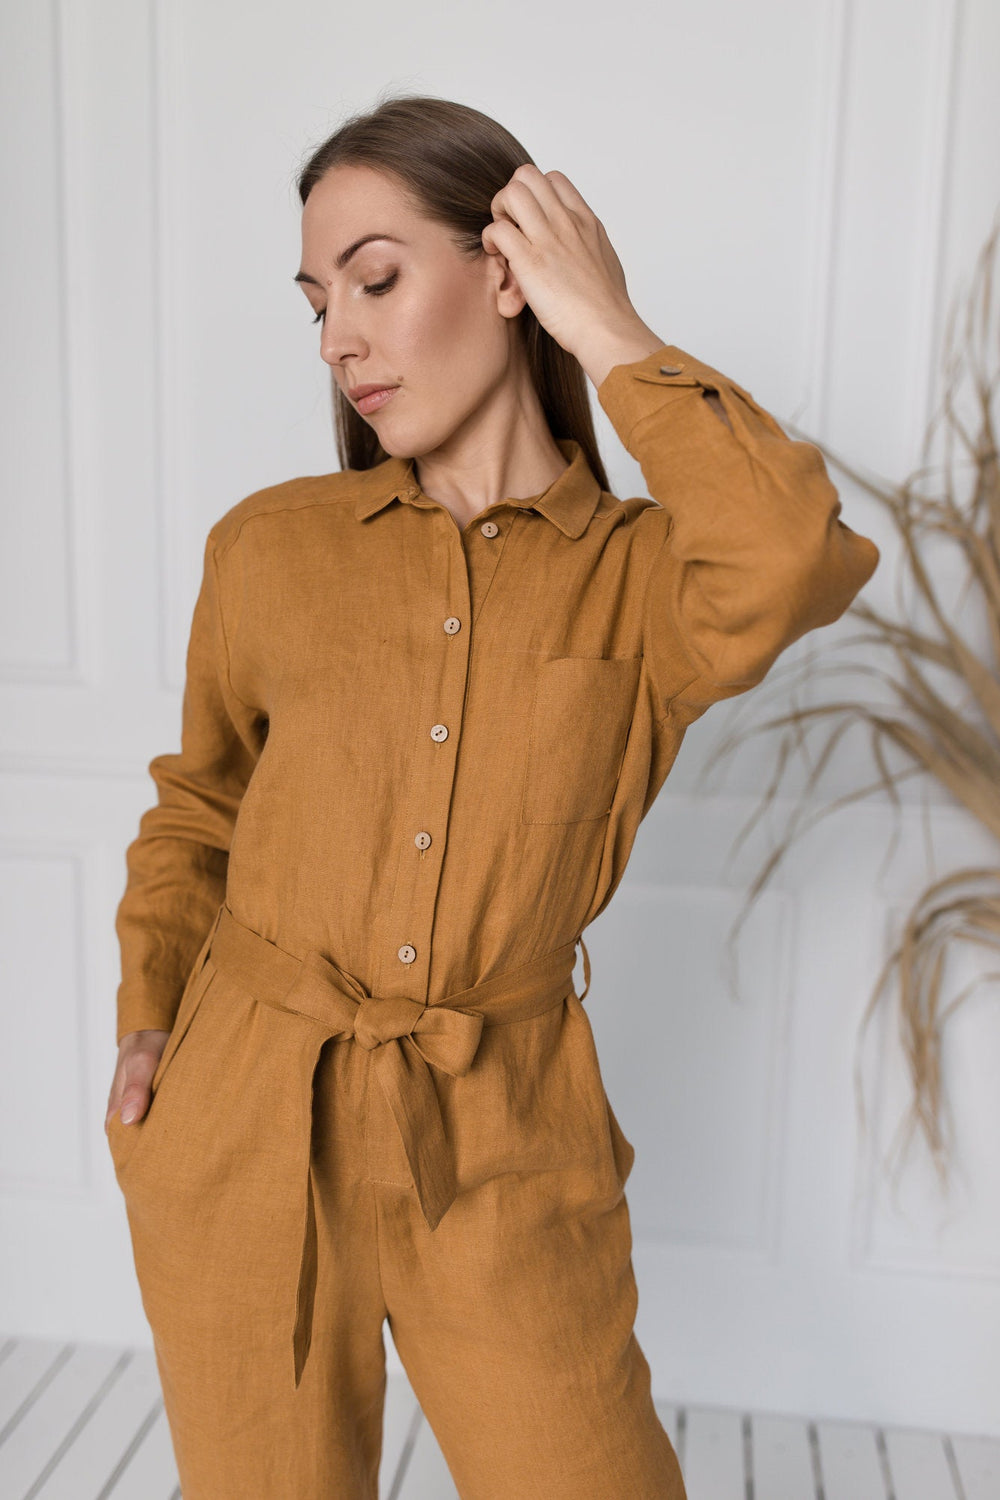 Linen Jumpsuit LUGANO In Amber Yellow Color 1 - Daily Linen